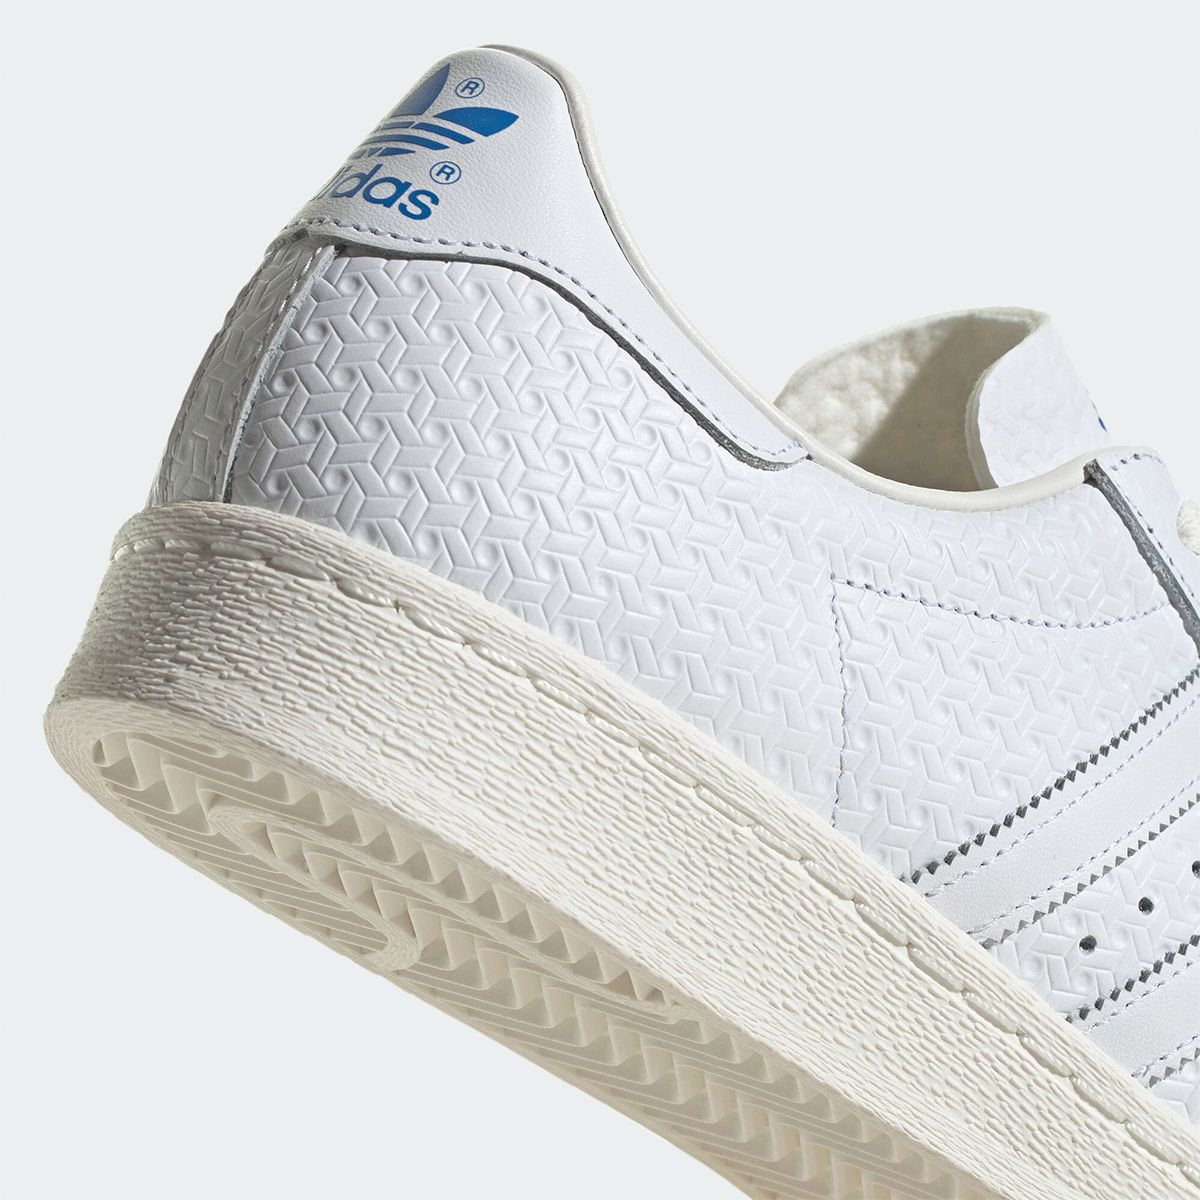 adidas Adds Goyard-Like Debossing to the Superstar | HOUSE OF HEAT